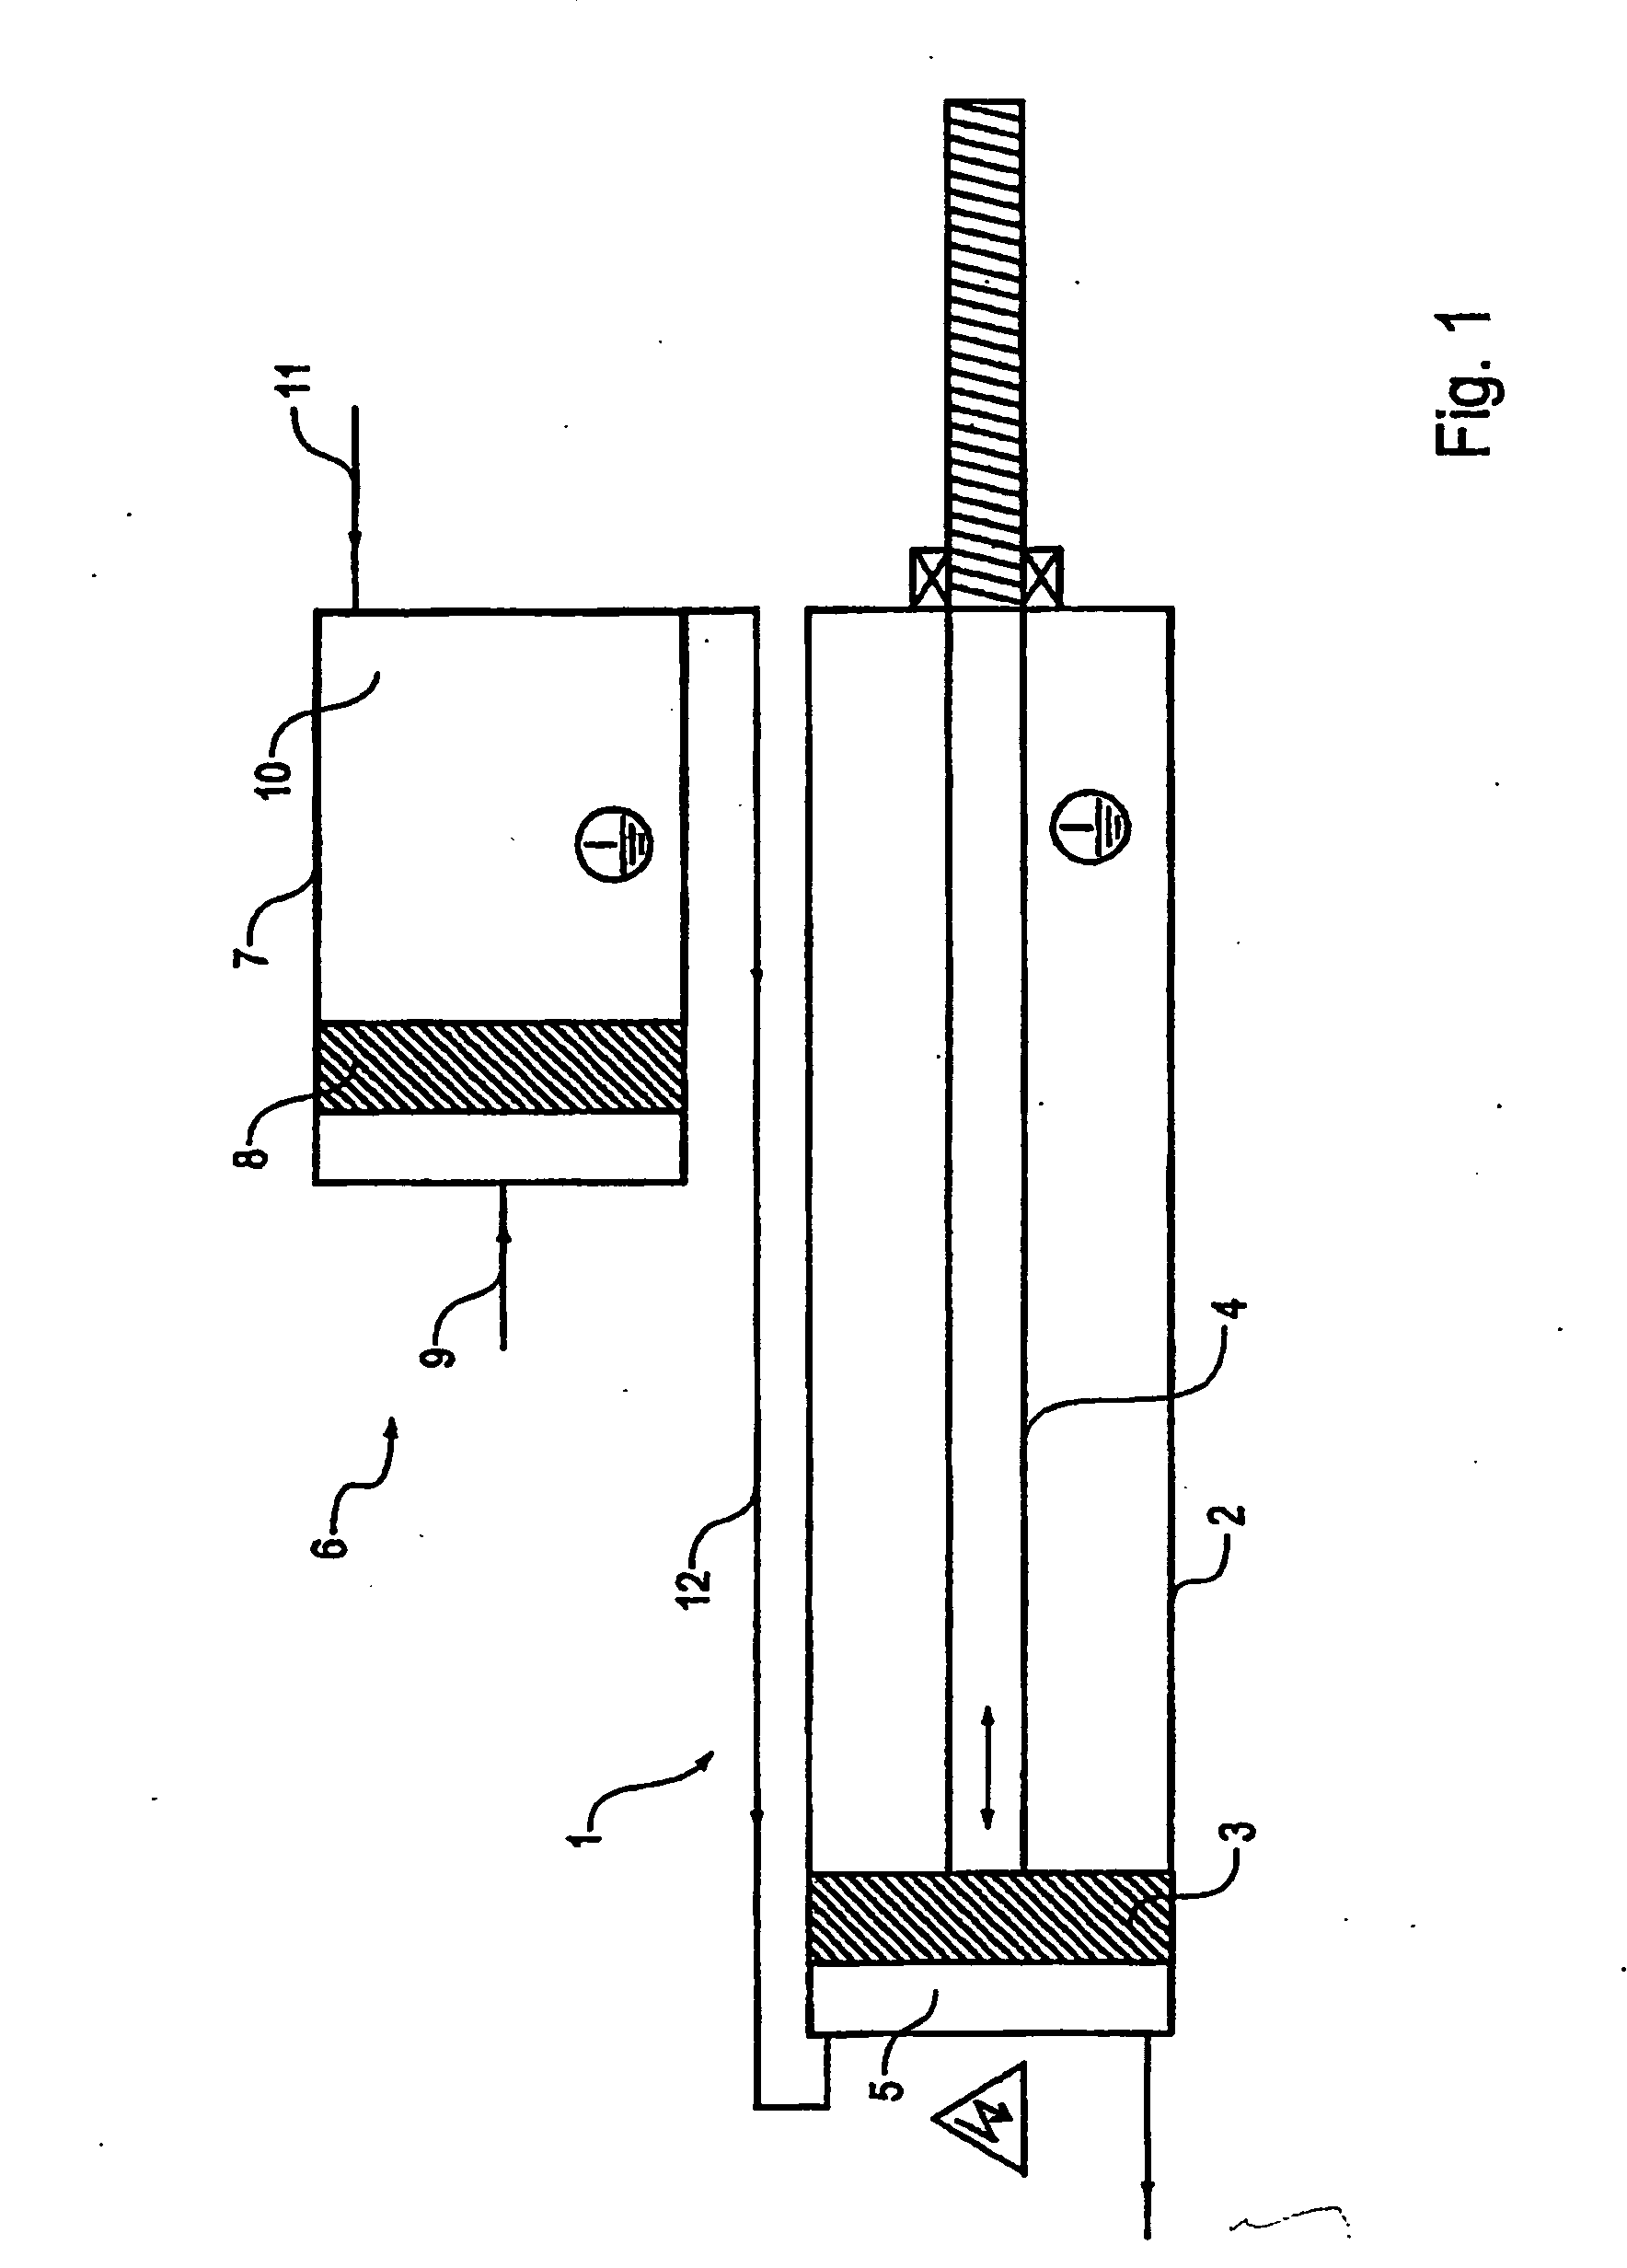 Coating material supply installation and associated operating procedure